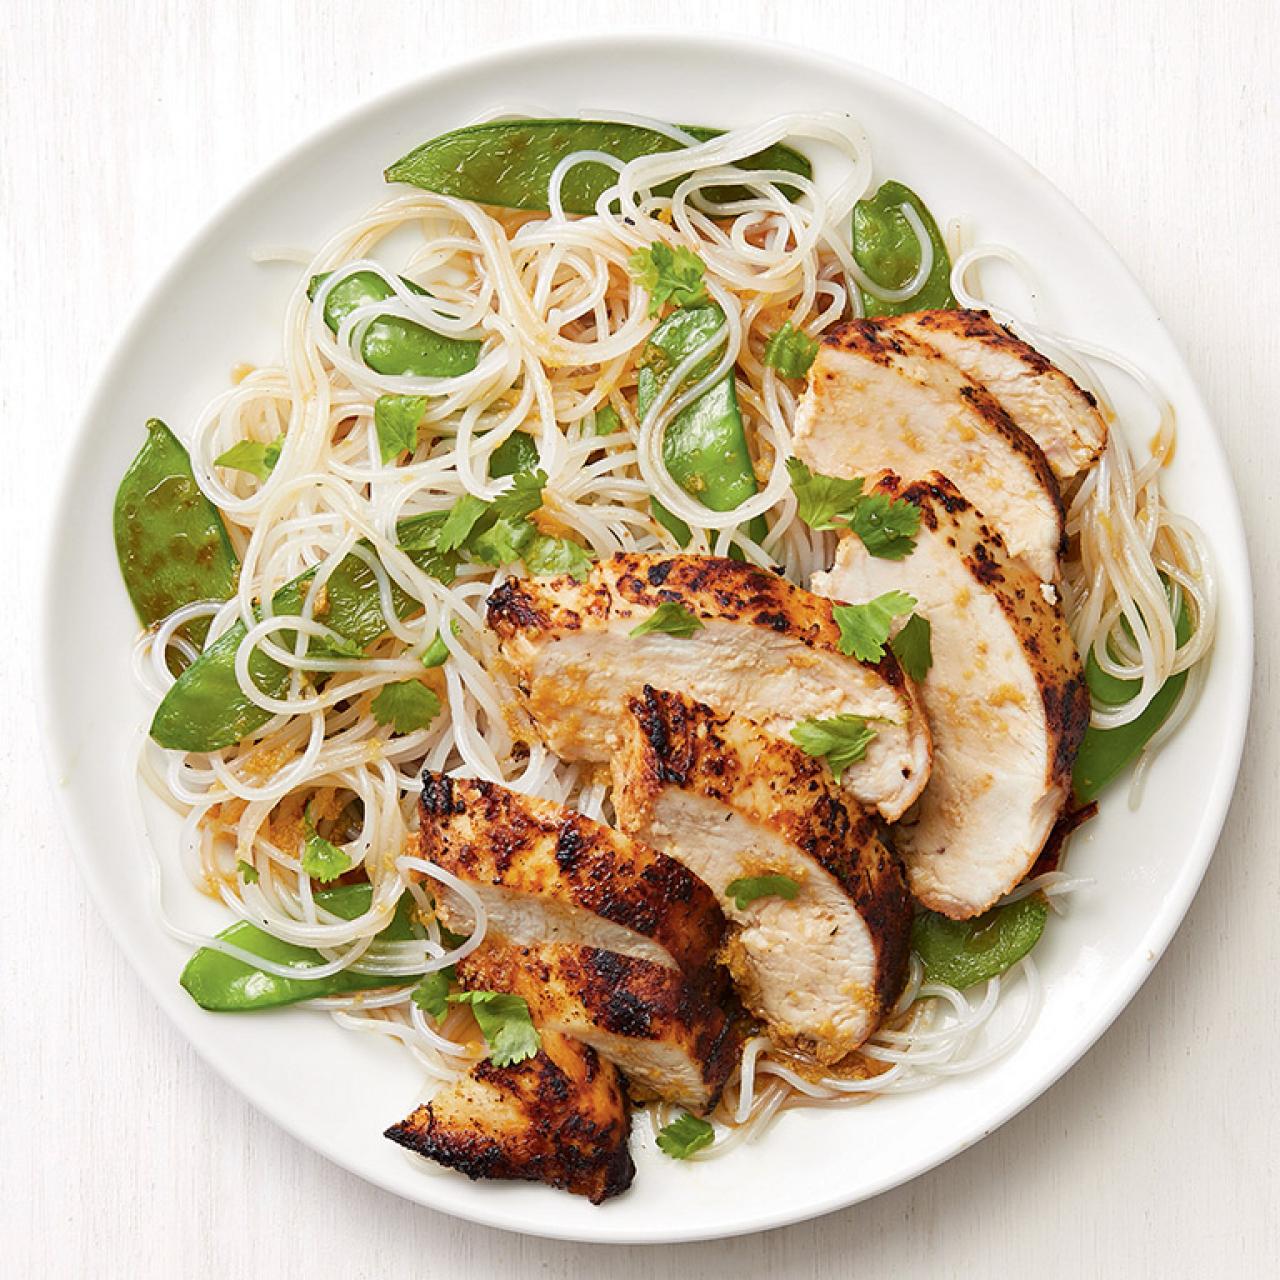 Sainsbury's Simply Cook South Asian Inspired Chicken Noodles Meal